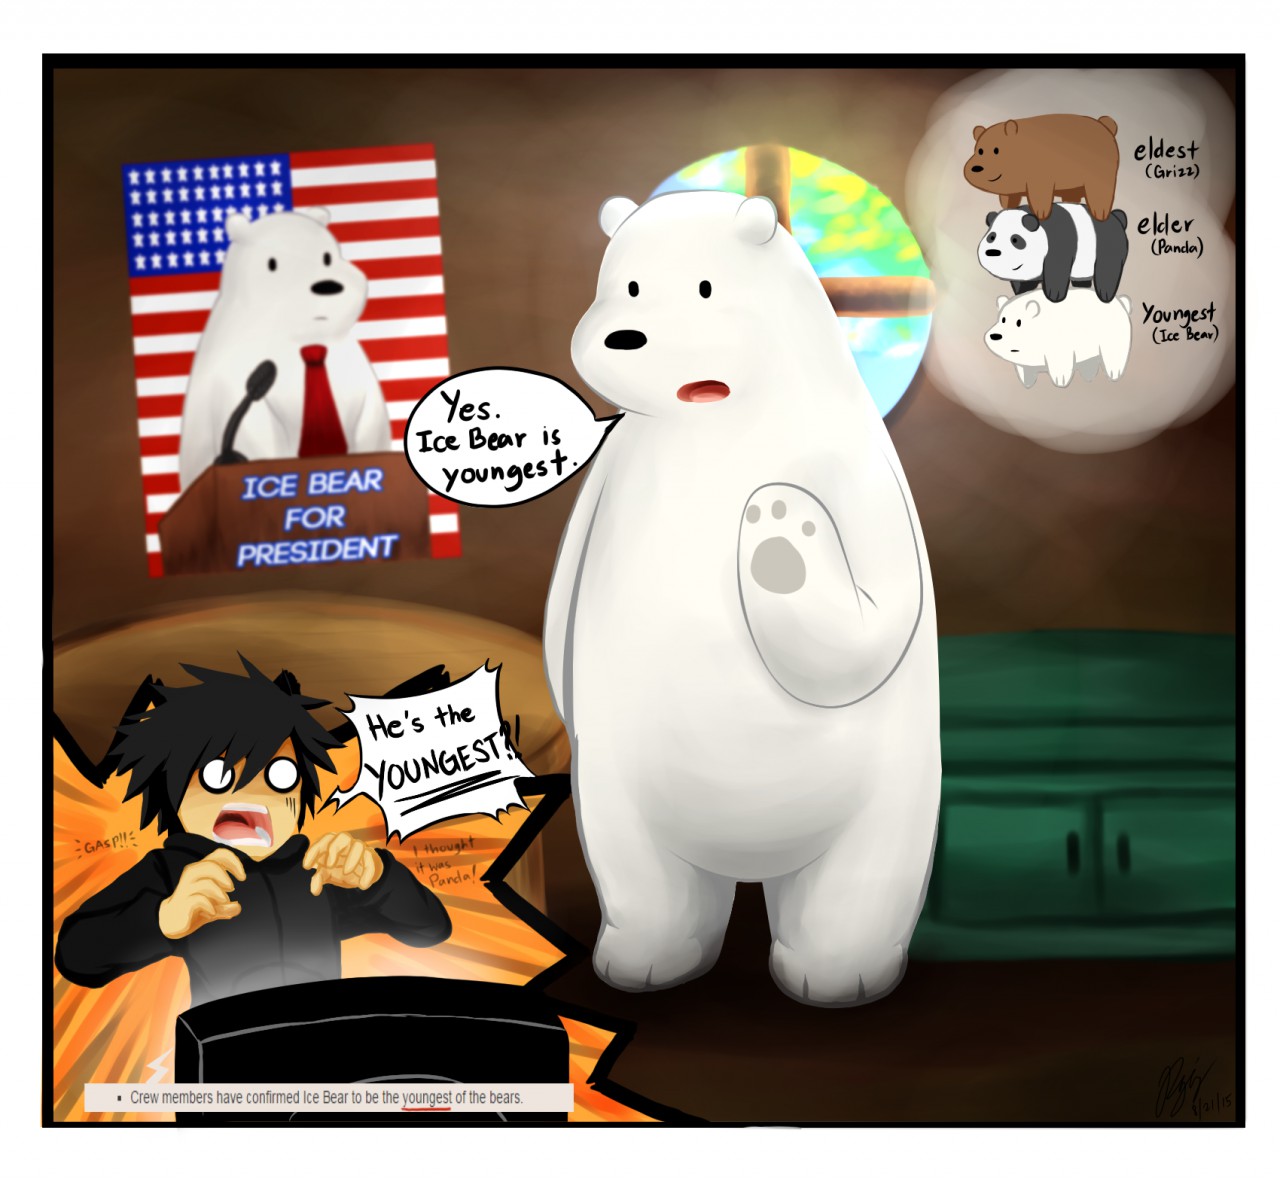 19 Facts About Grizz (We Bare Bears) 